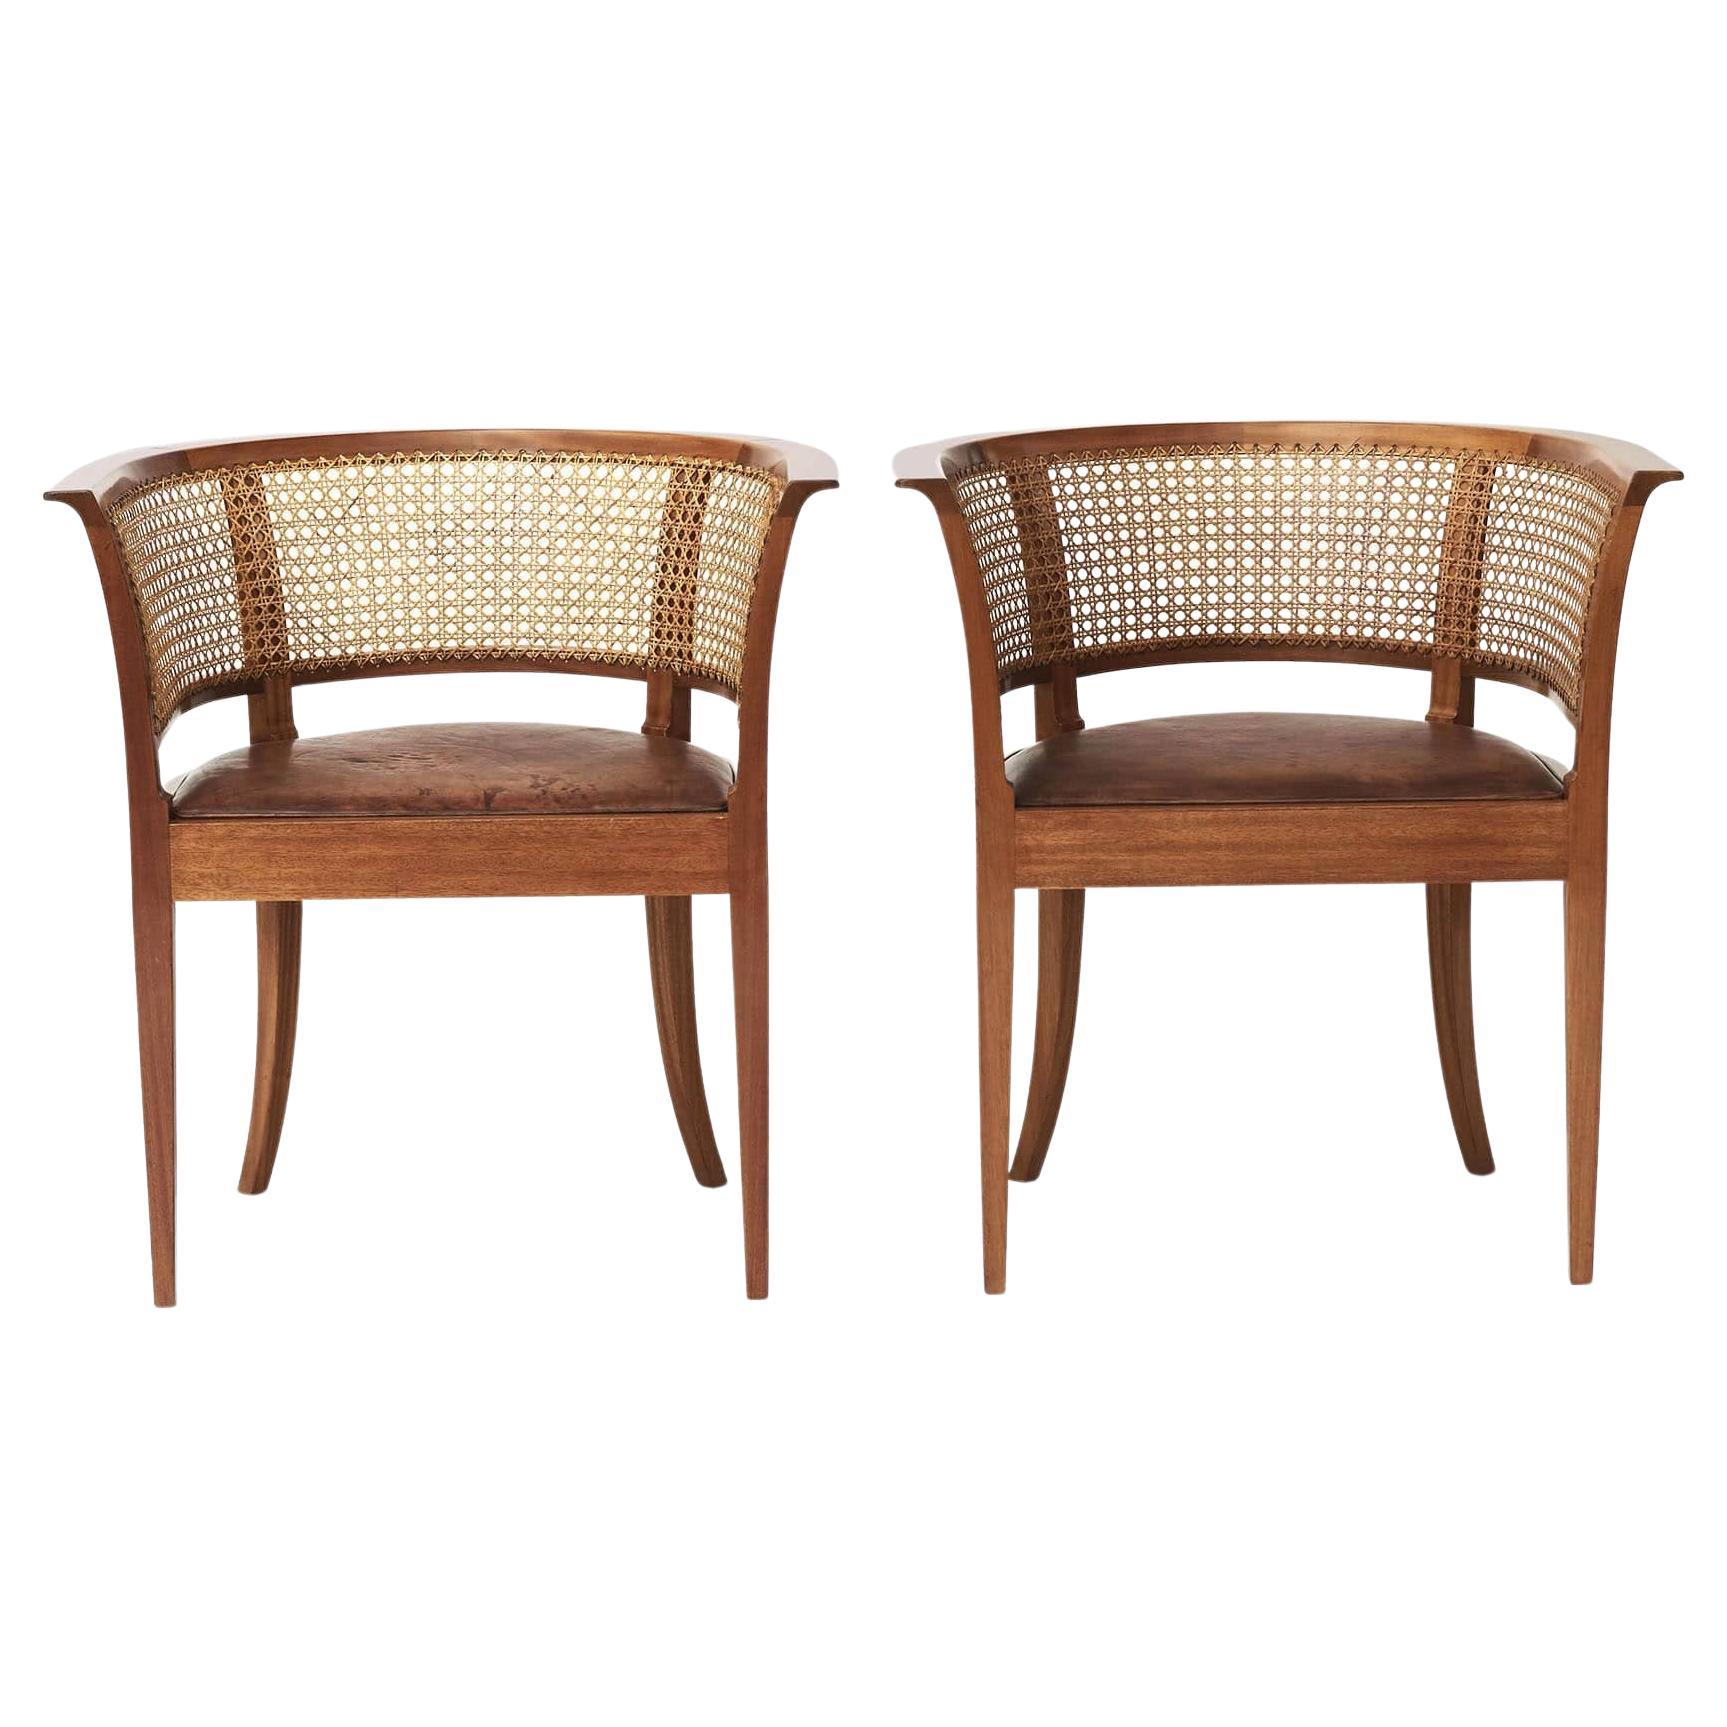 Kaare Klint, a Pair of Faaborg Chairs in Mahogany